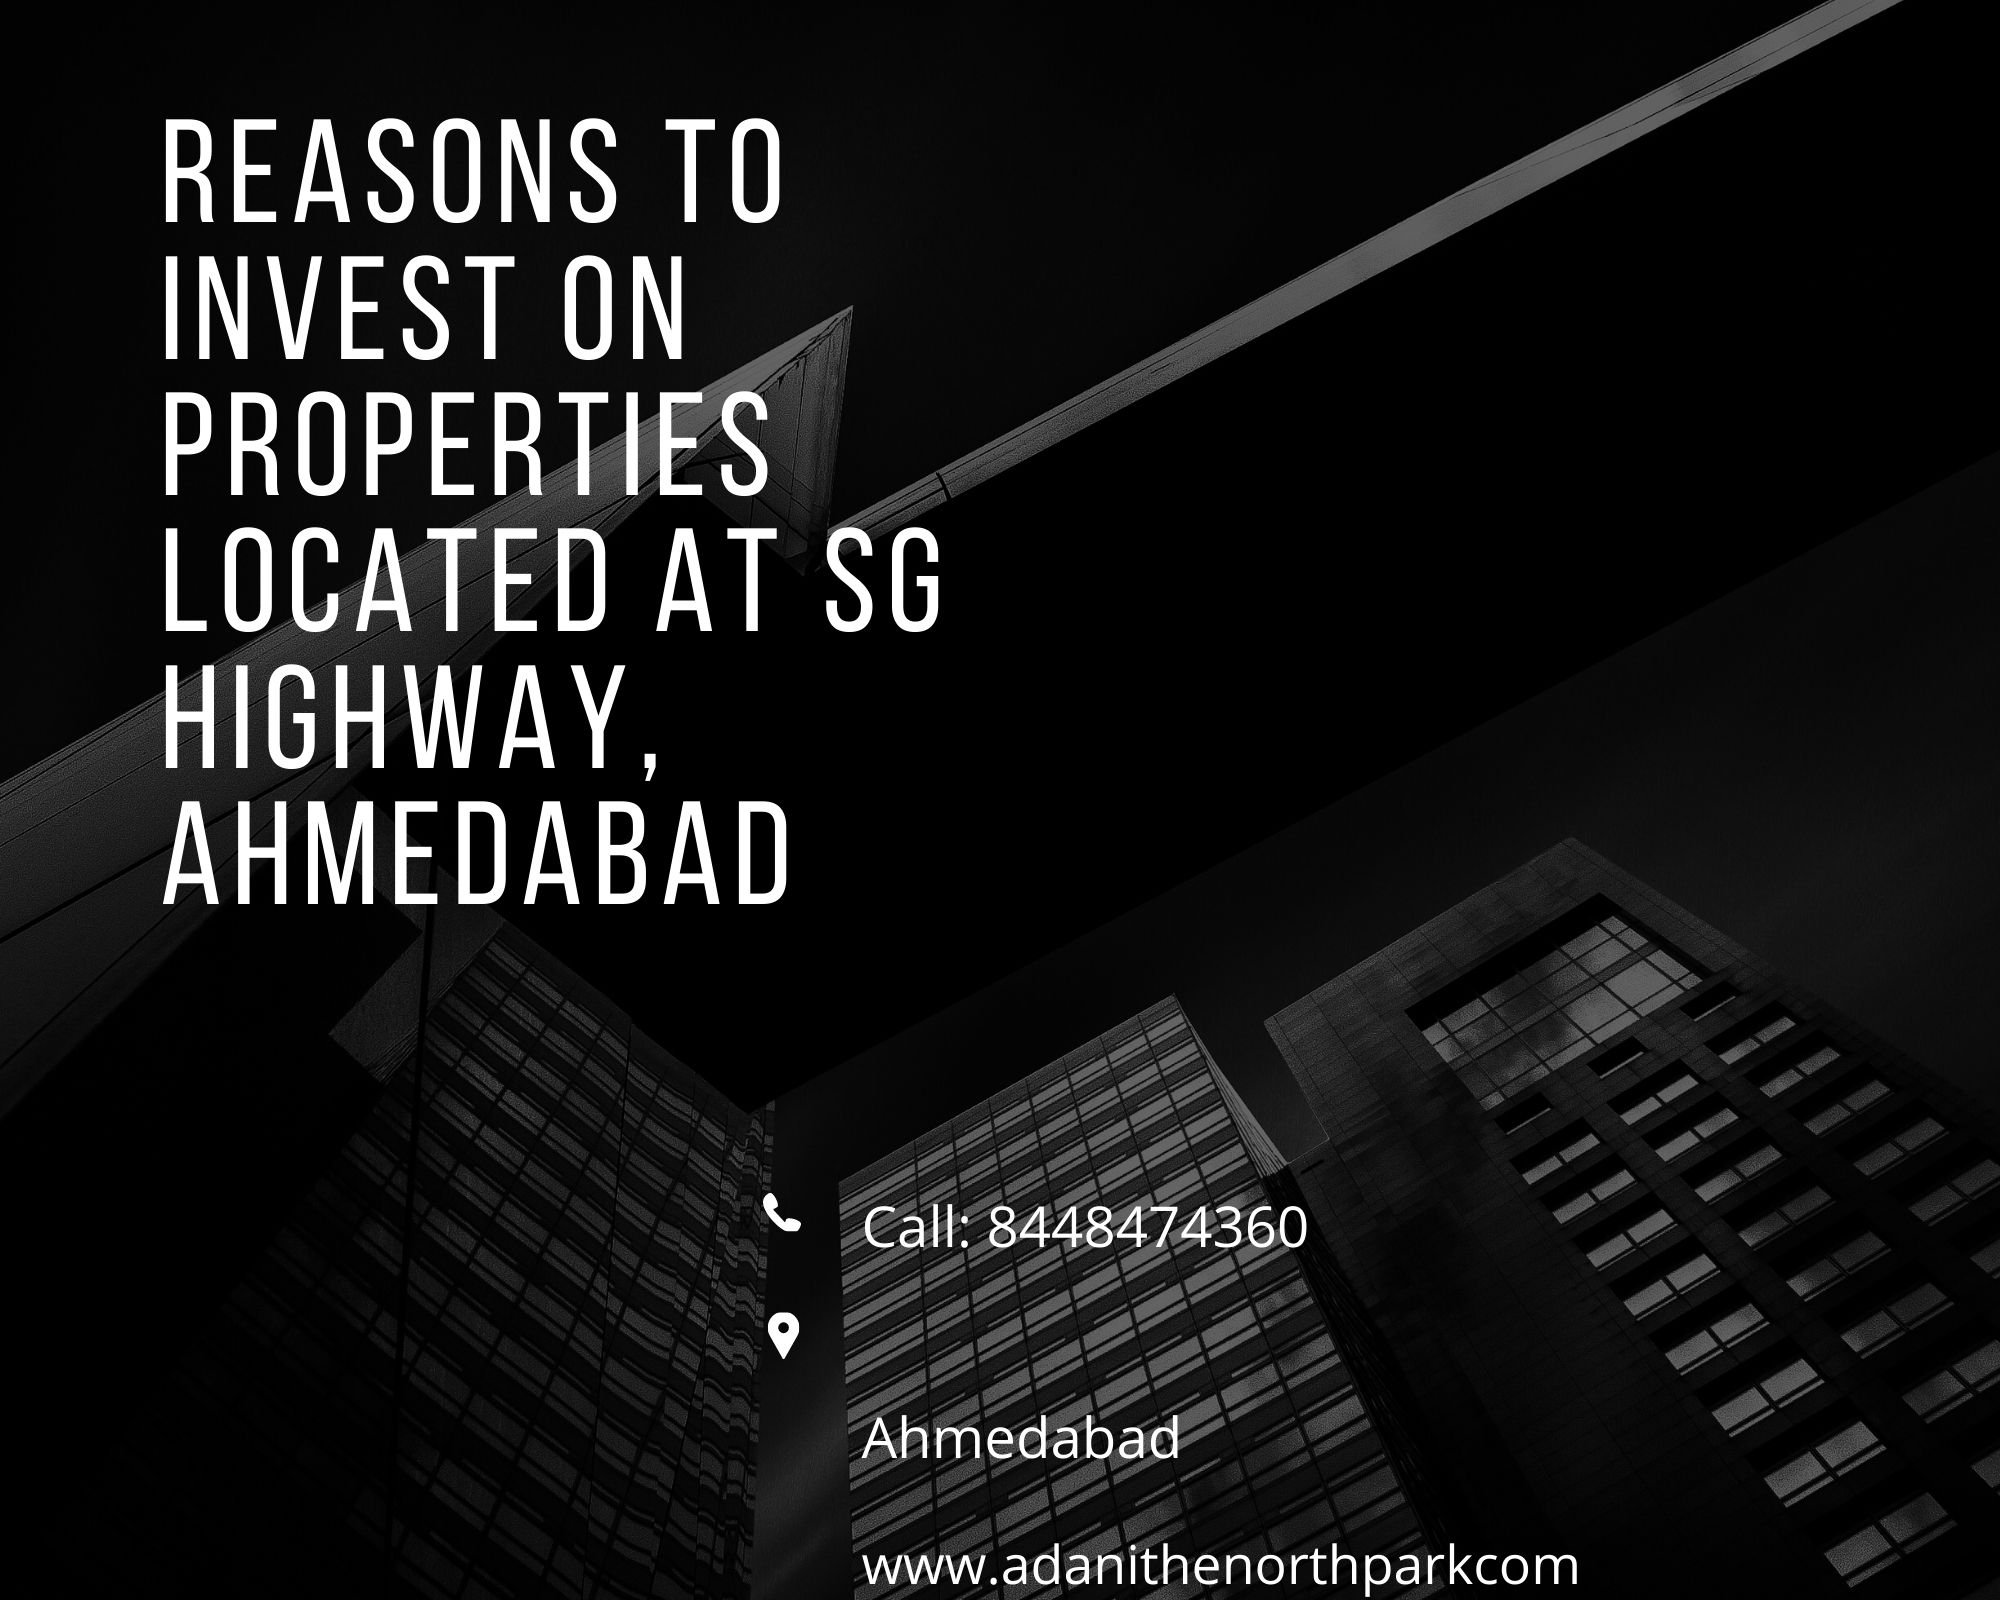 Reasons To Invest On Properties Located At SG Highway, Ahmedabad